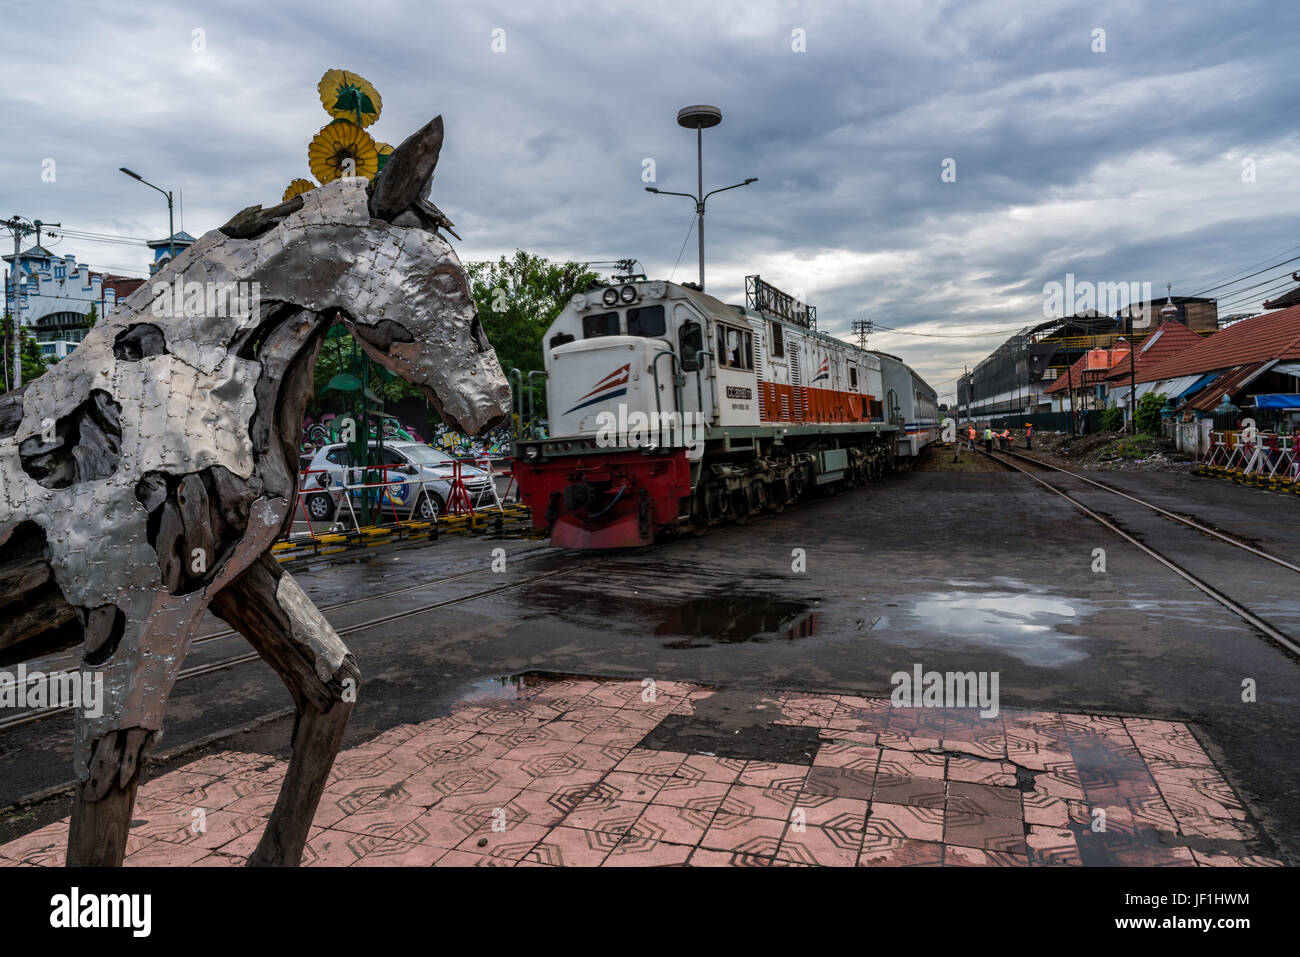 Train arriving at the Yogyakarta railway station.  View of locomotive and horse sculpture standing between the two railway tracks. Stock Photo